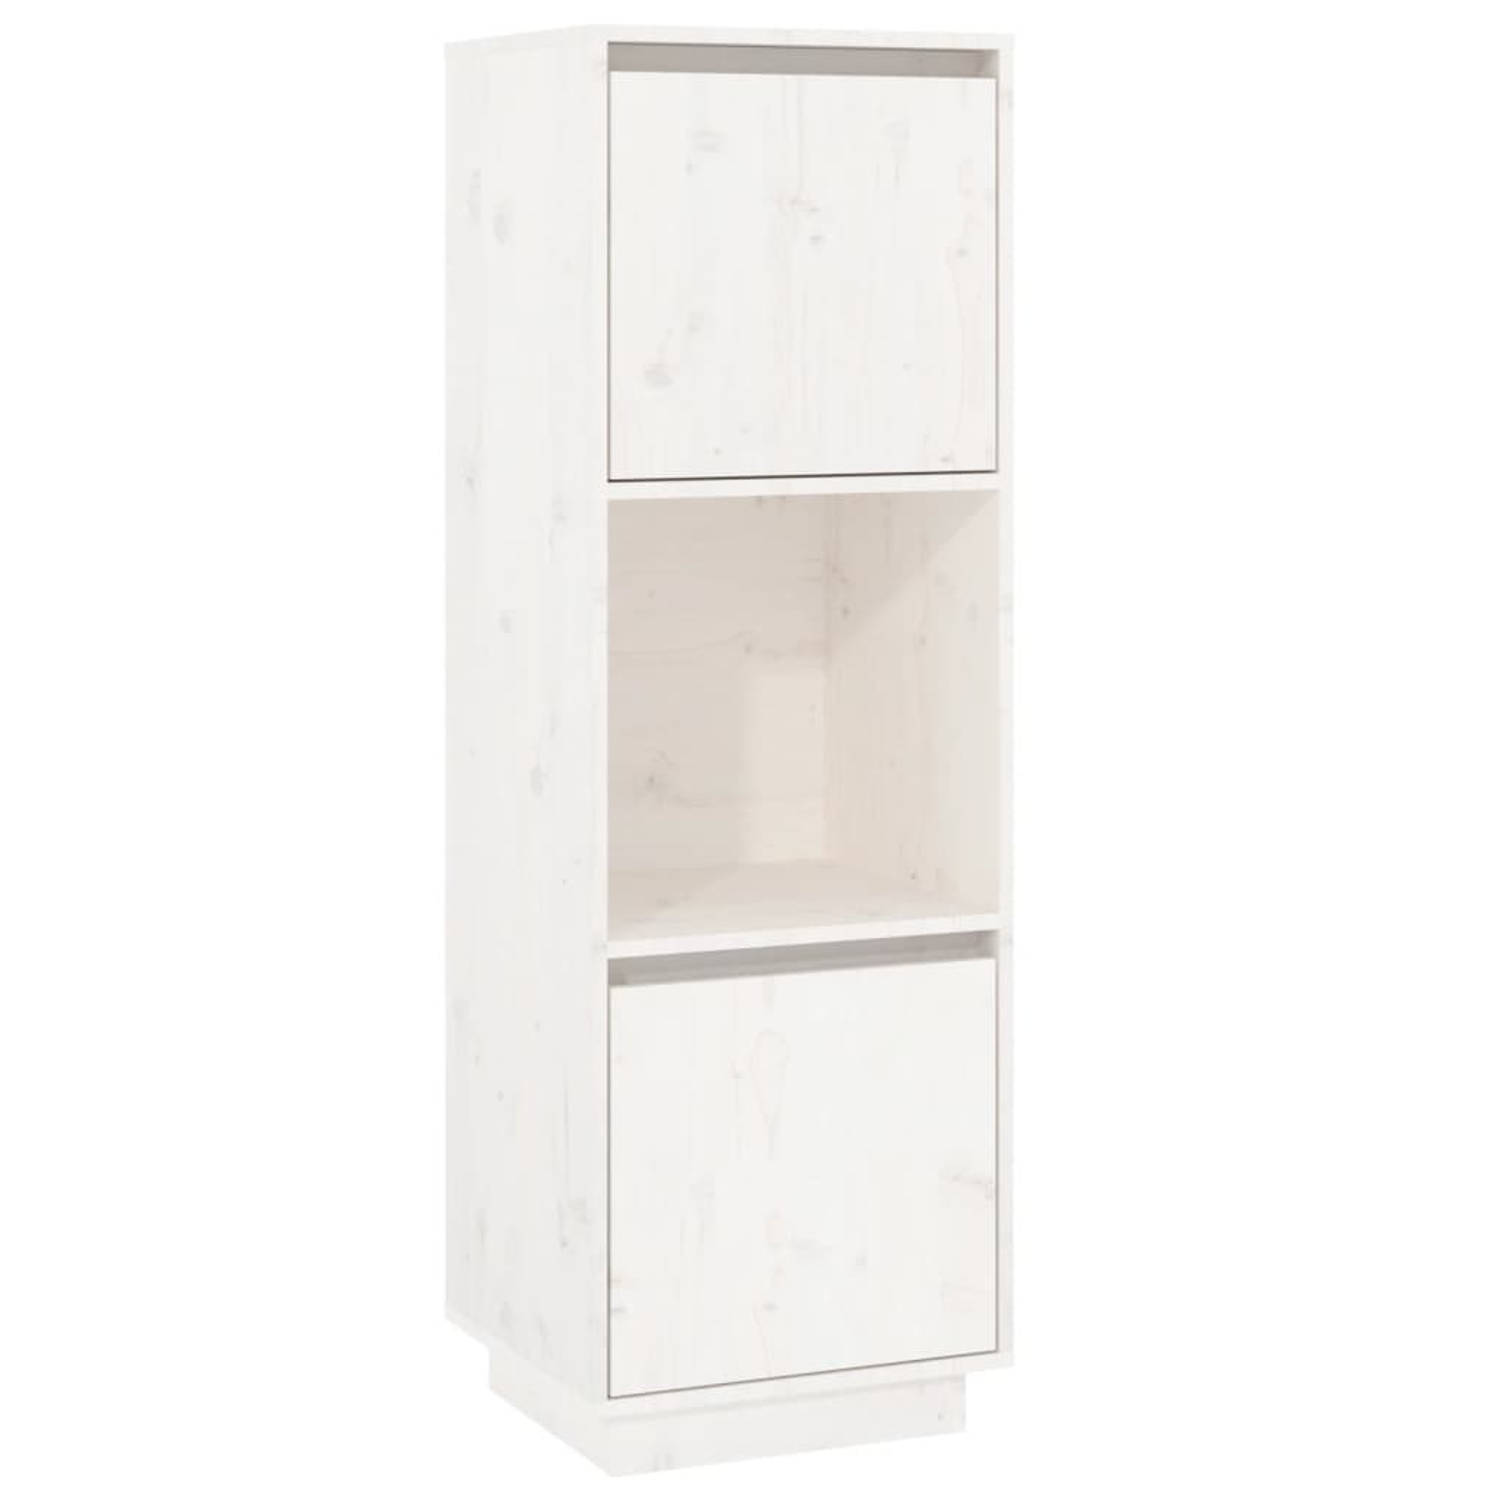 The Living Store Hoge kast - Grenenhout - 38 x 35 x 117 cm - Wit